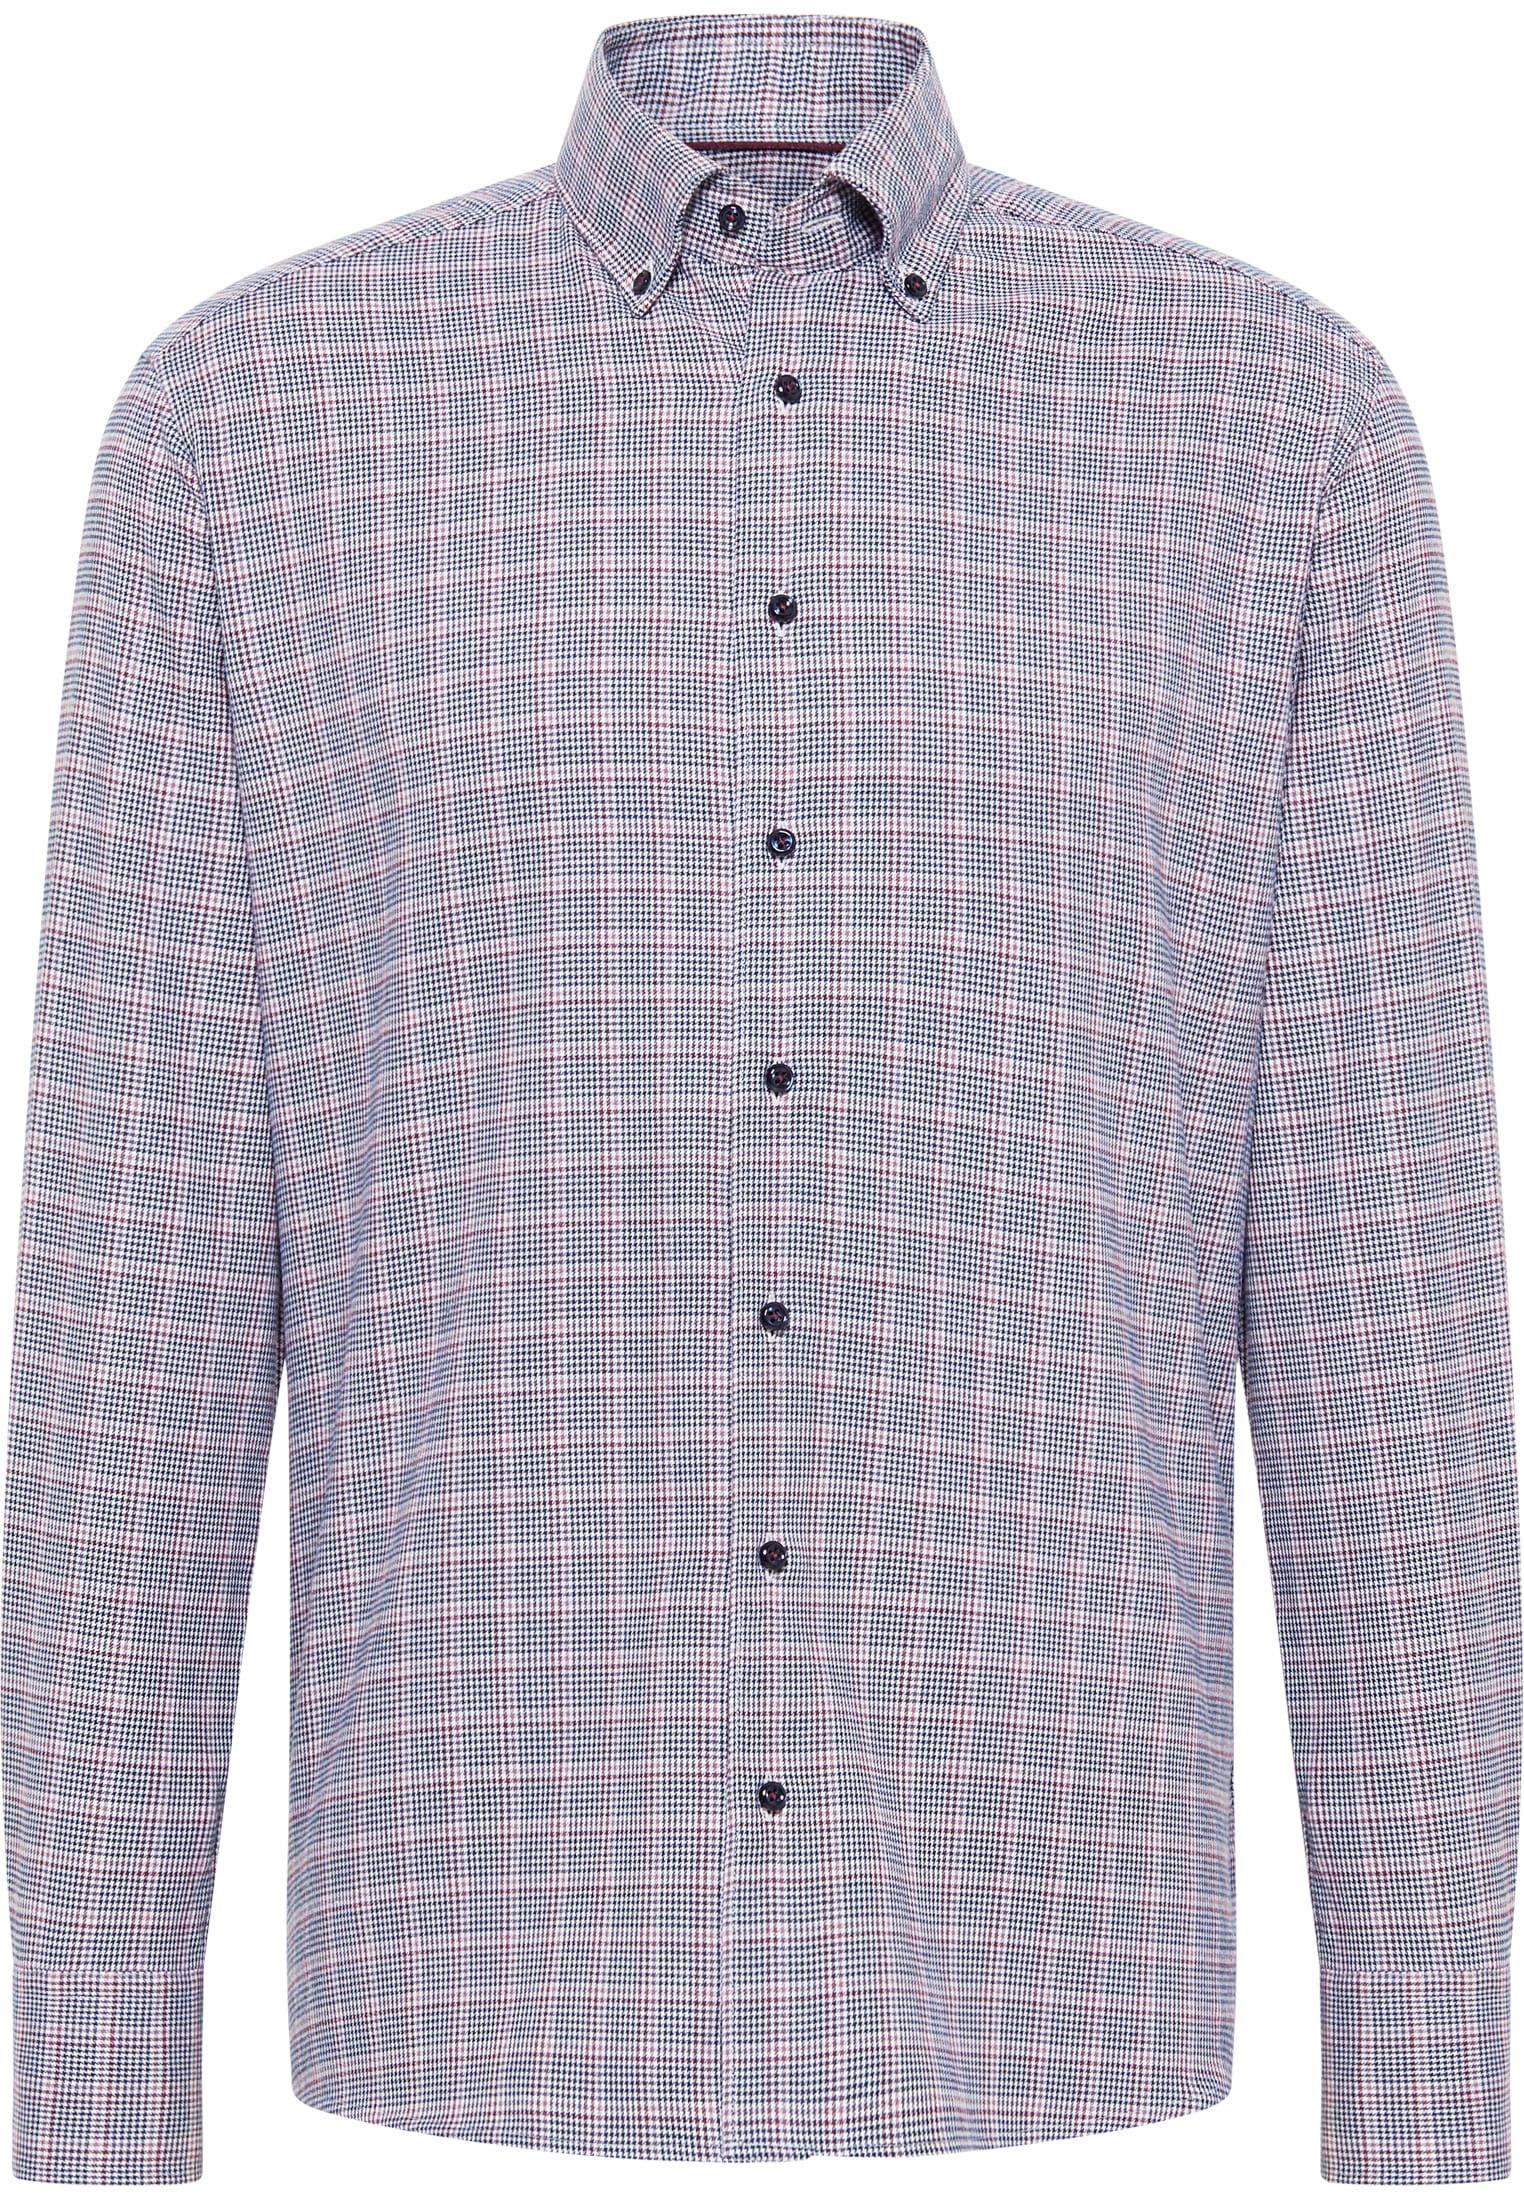 MODERN FIT Shirt in wine red checkered